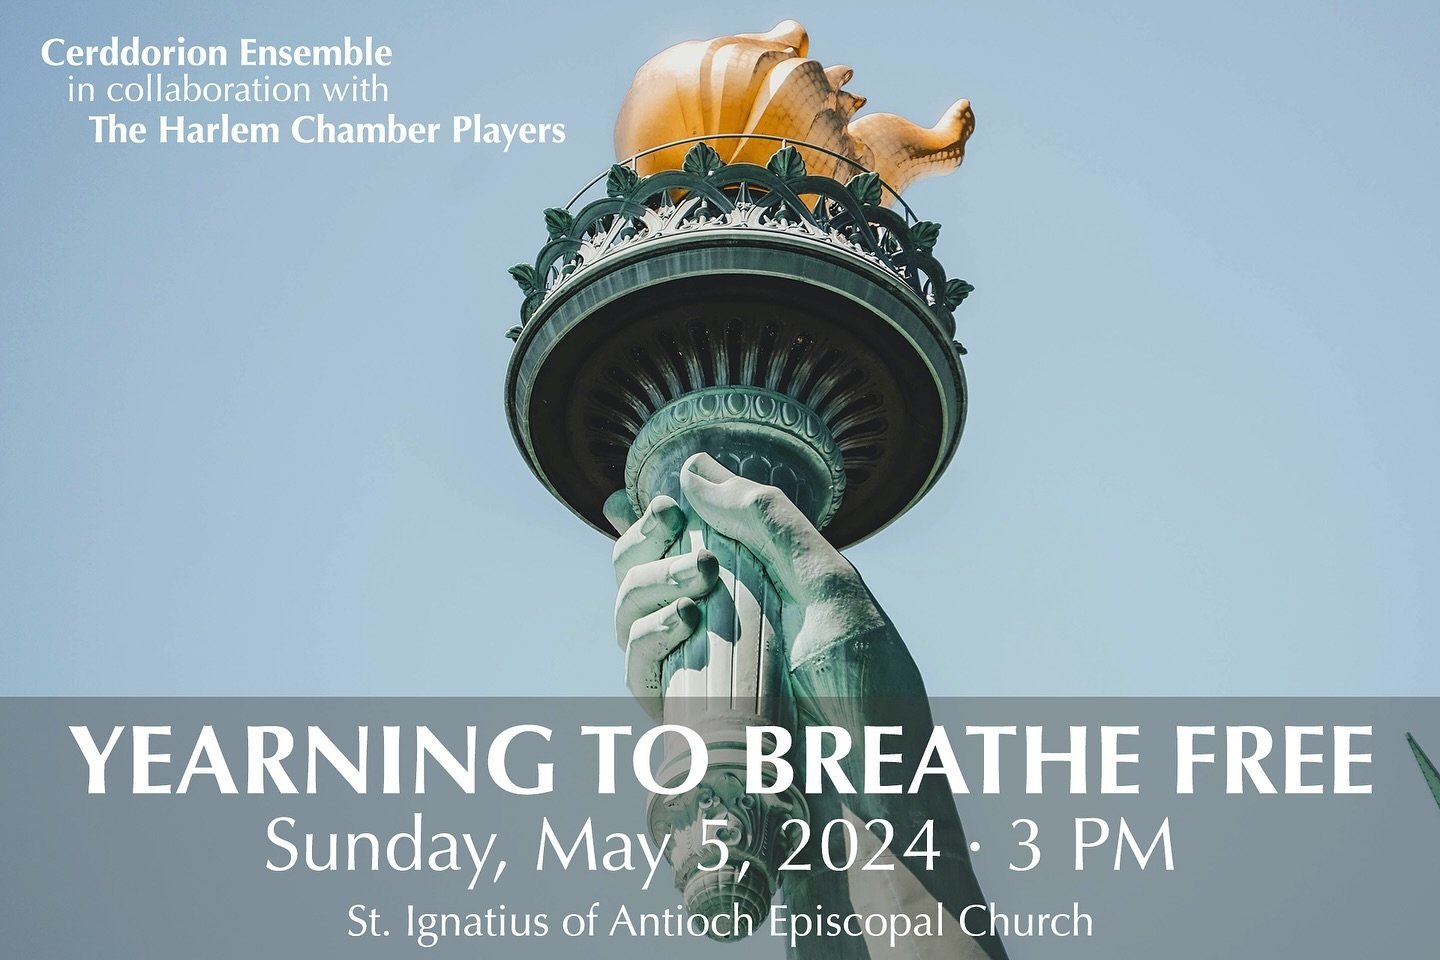 The Harlem Chamber Players will join the Cerddorion Vocal Ensemble to perform selections from the poetry of Emma Lazarus and the music of Dietrich Buxtehude are dual inspirations for Caroline Shaw&rsquo;s deeply moving cantata, To the Hands, which ex